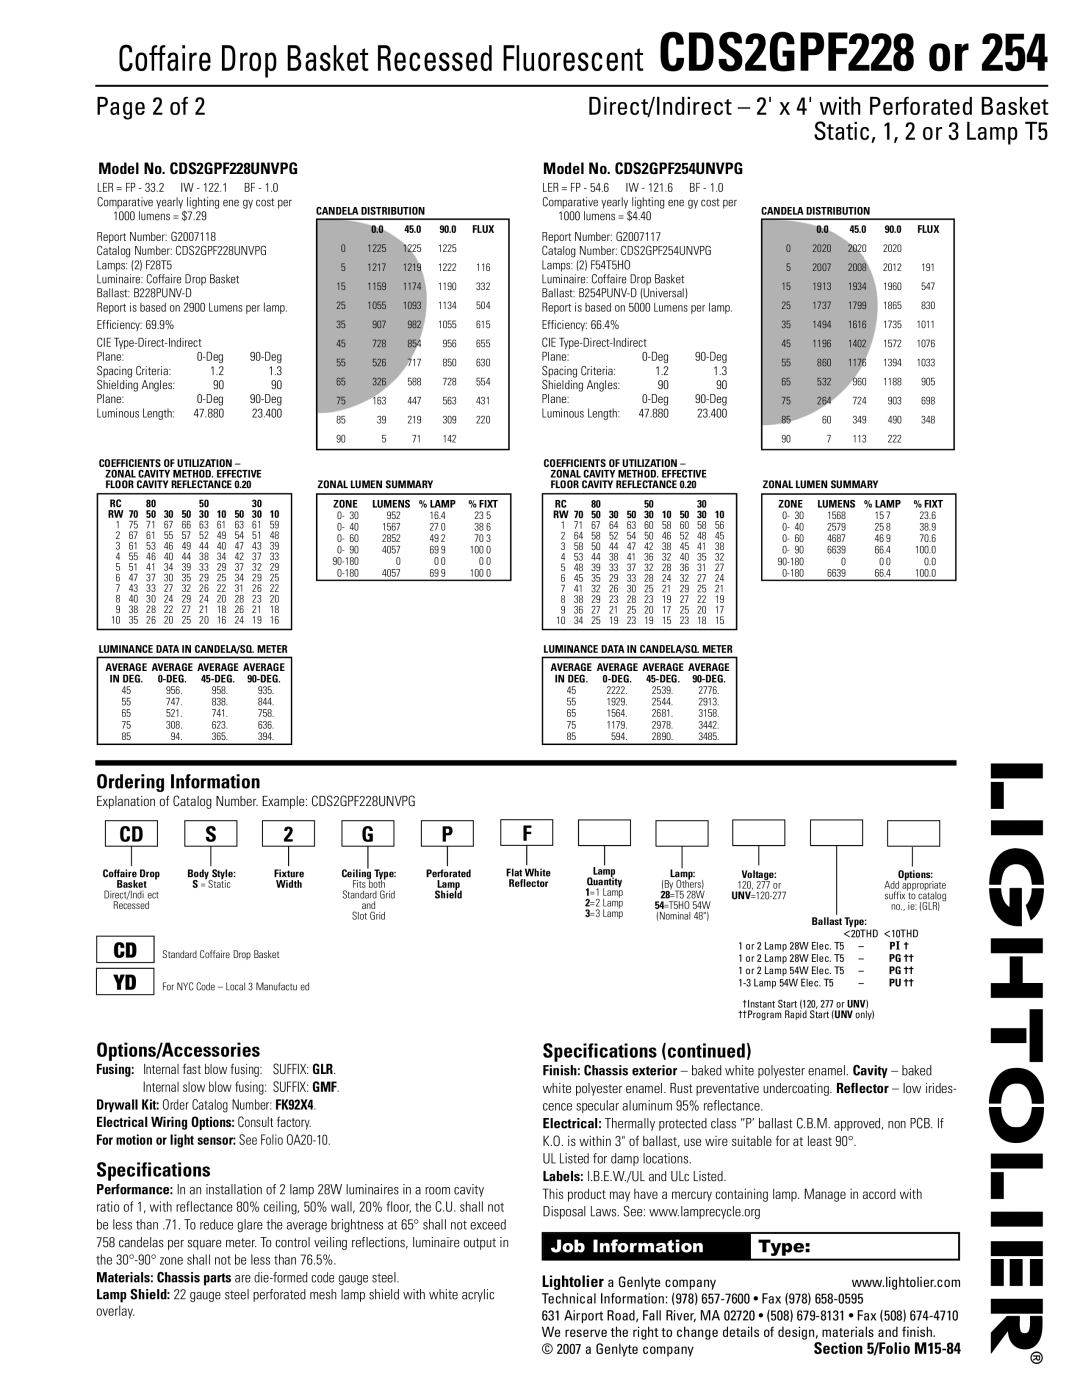 Lightolier CDS2GPF228 Page 2 of, Ordering Information, Options/Accessories, Specifications continued, Job Information 